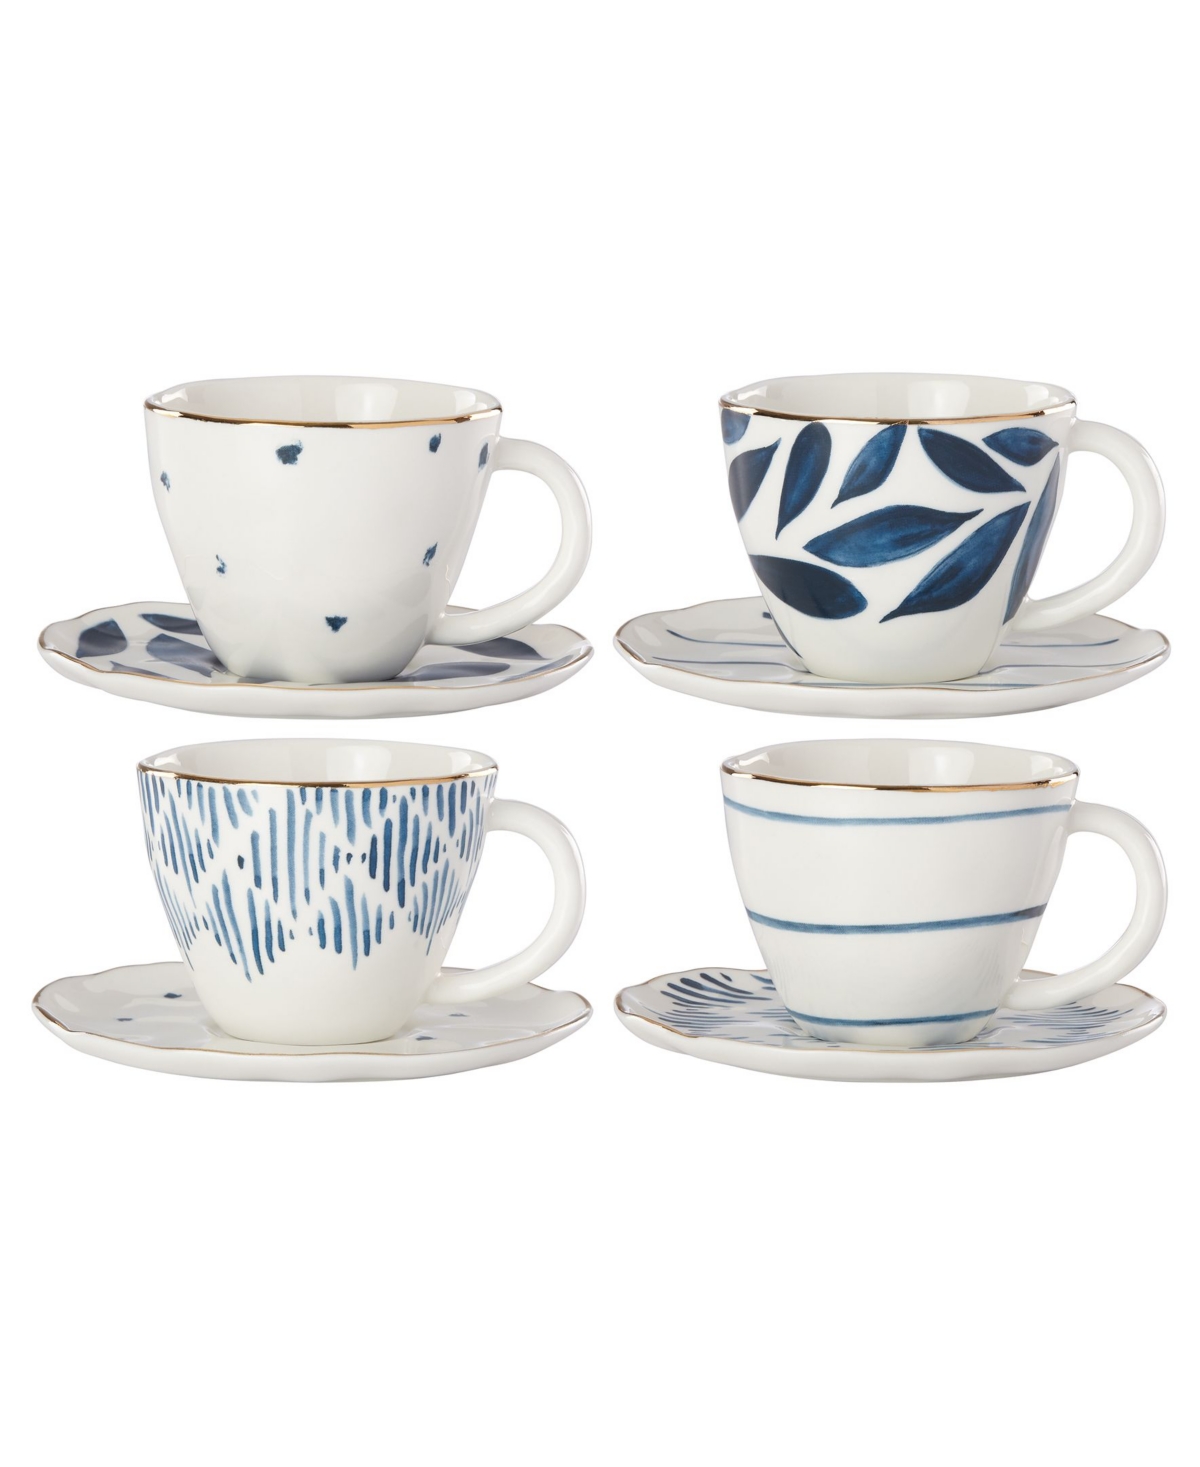 Blue Bay Set/4 Assorted Espresso Cup and Saucer - White And Blue